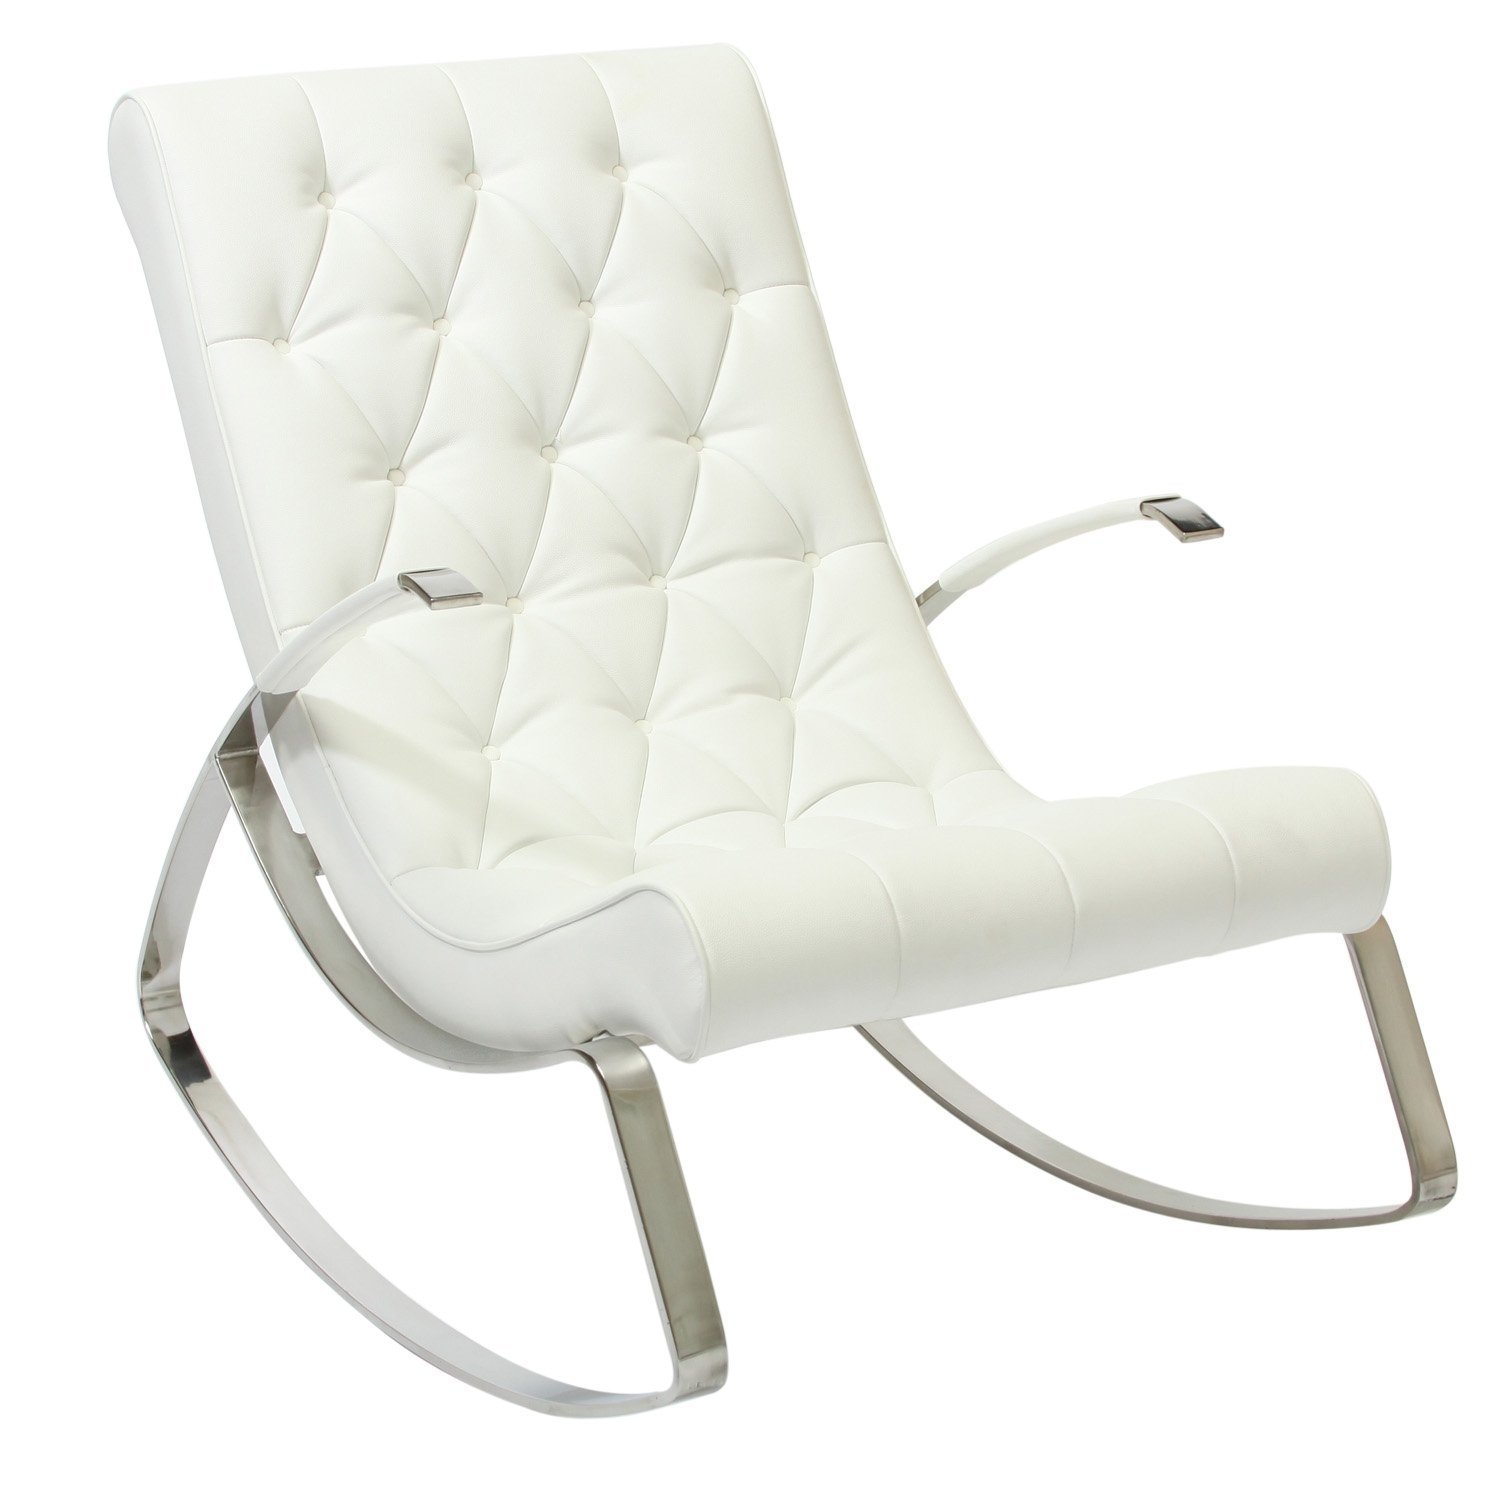 Cupola tufted white leather rocking chair 10